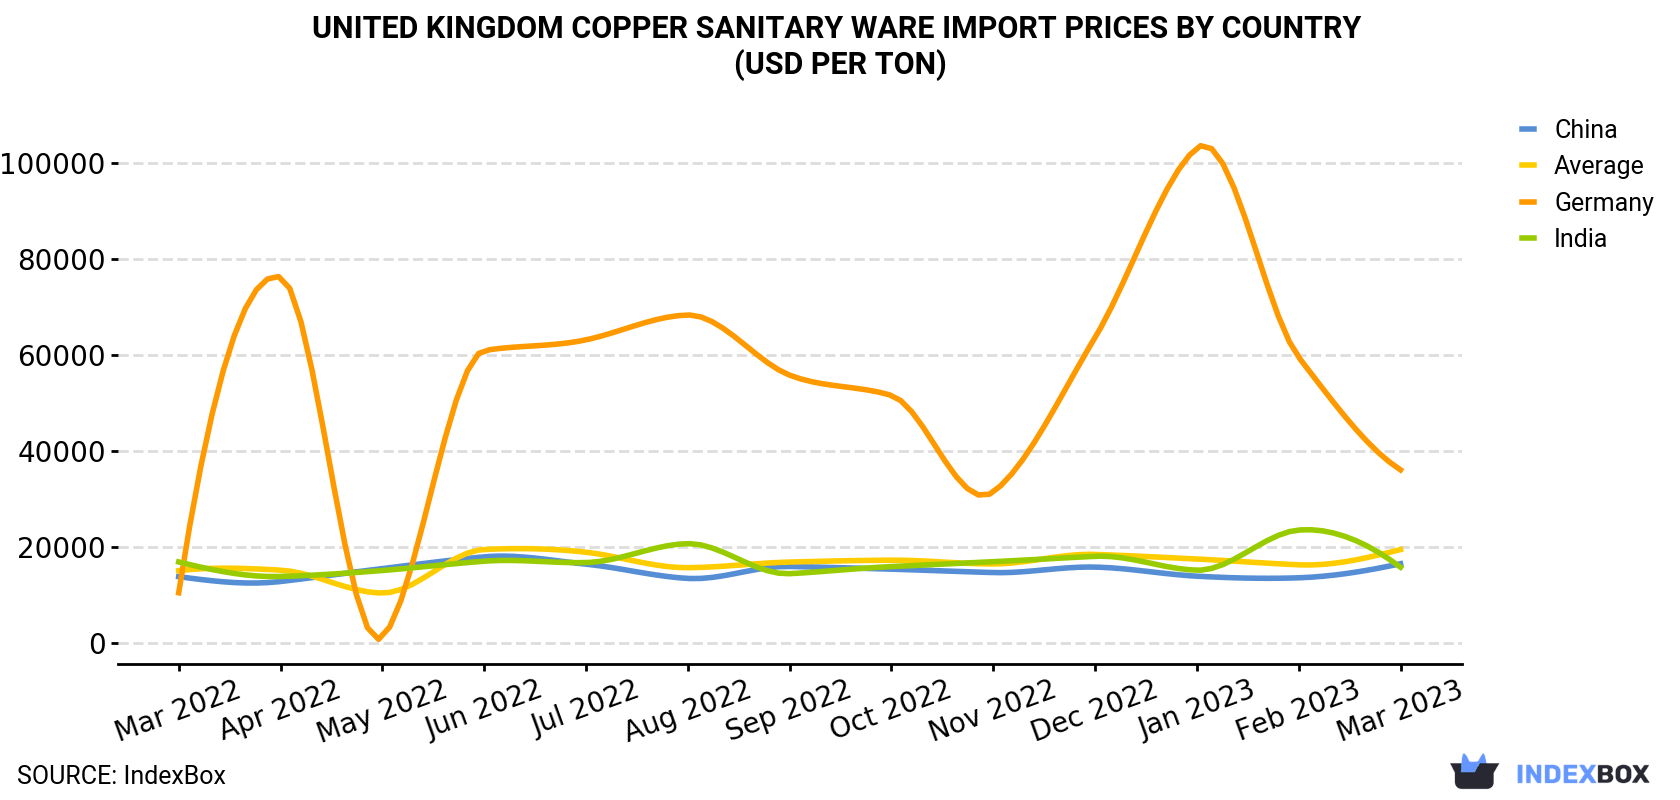 United Kingdom Copper Sanitary Ware Import Prices By Country (USD Per Ton)